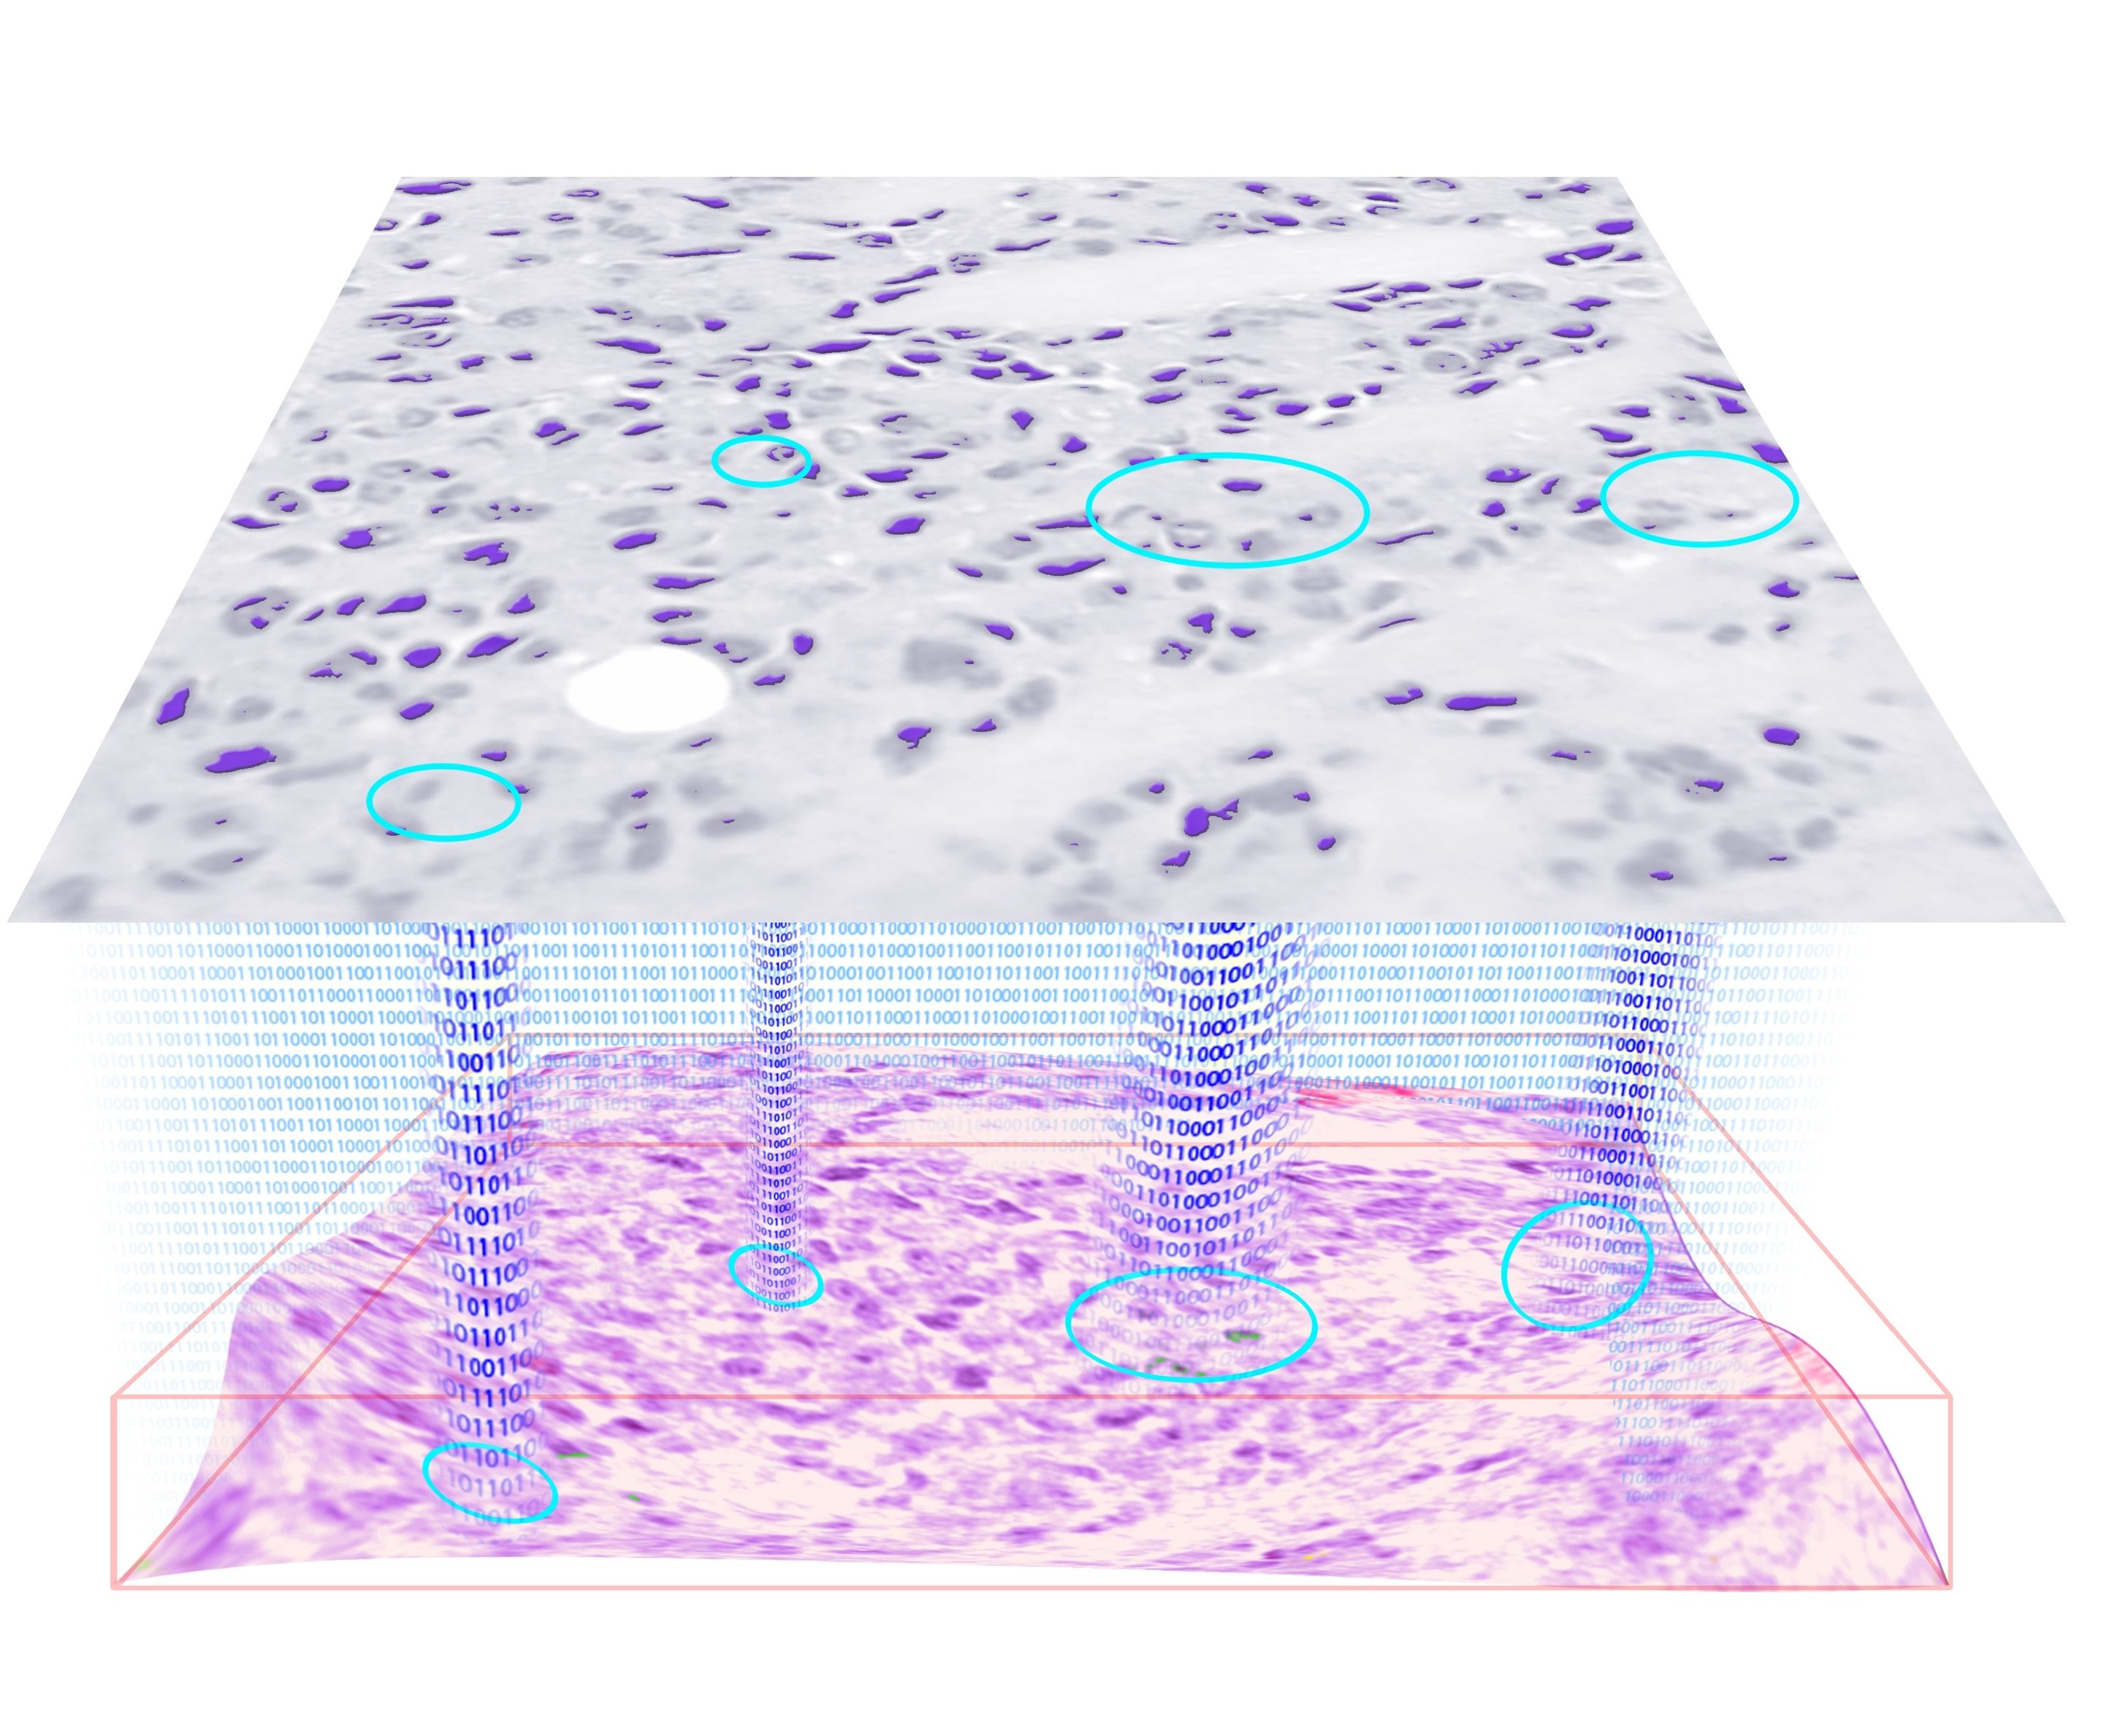 deep learning enables 3d holograms on